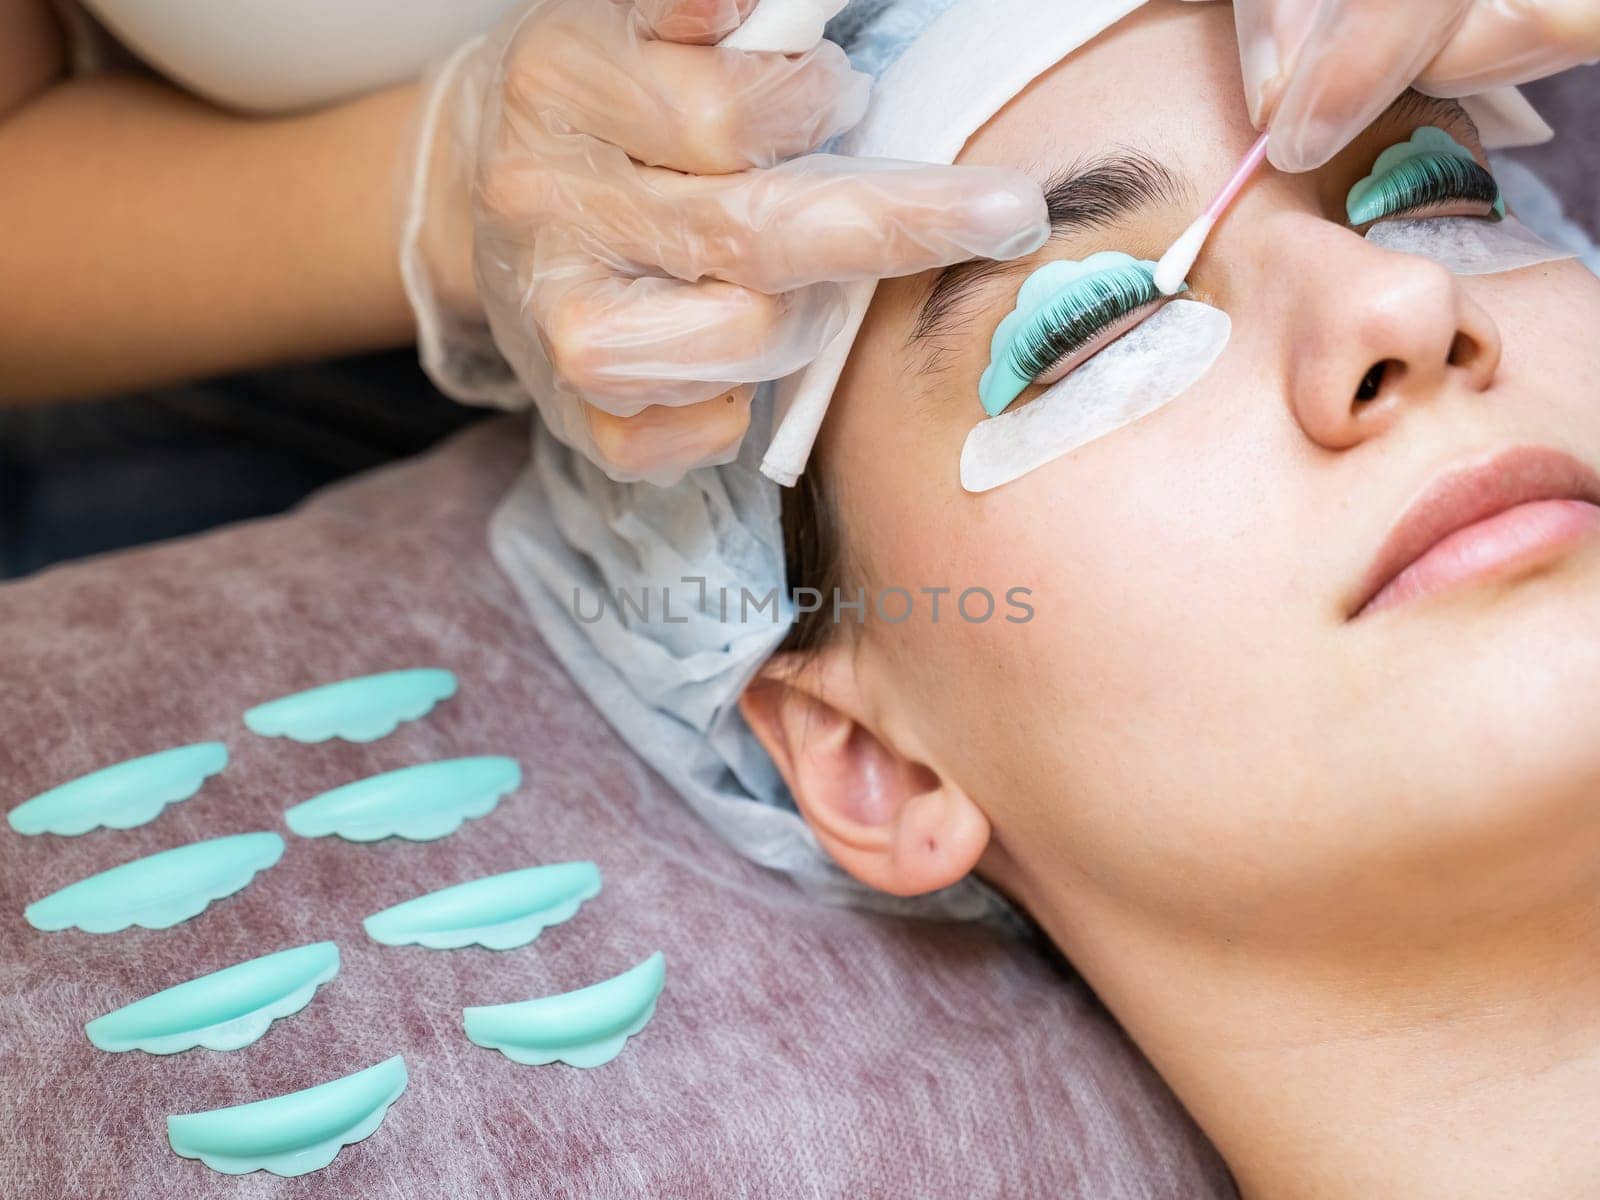 The master removes the composition for lamination from the client's eyelashes with a cotton swab. Eyelash perm procedure